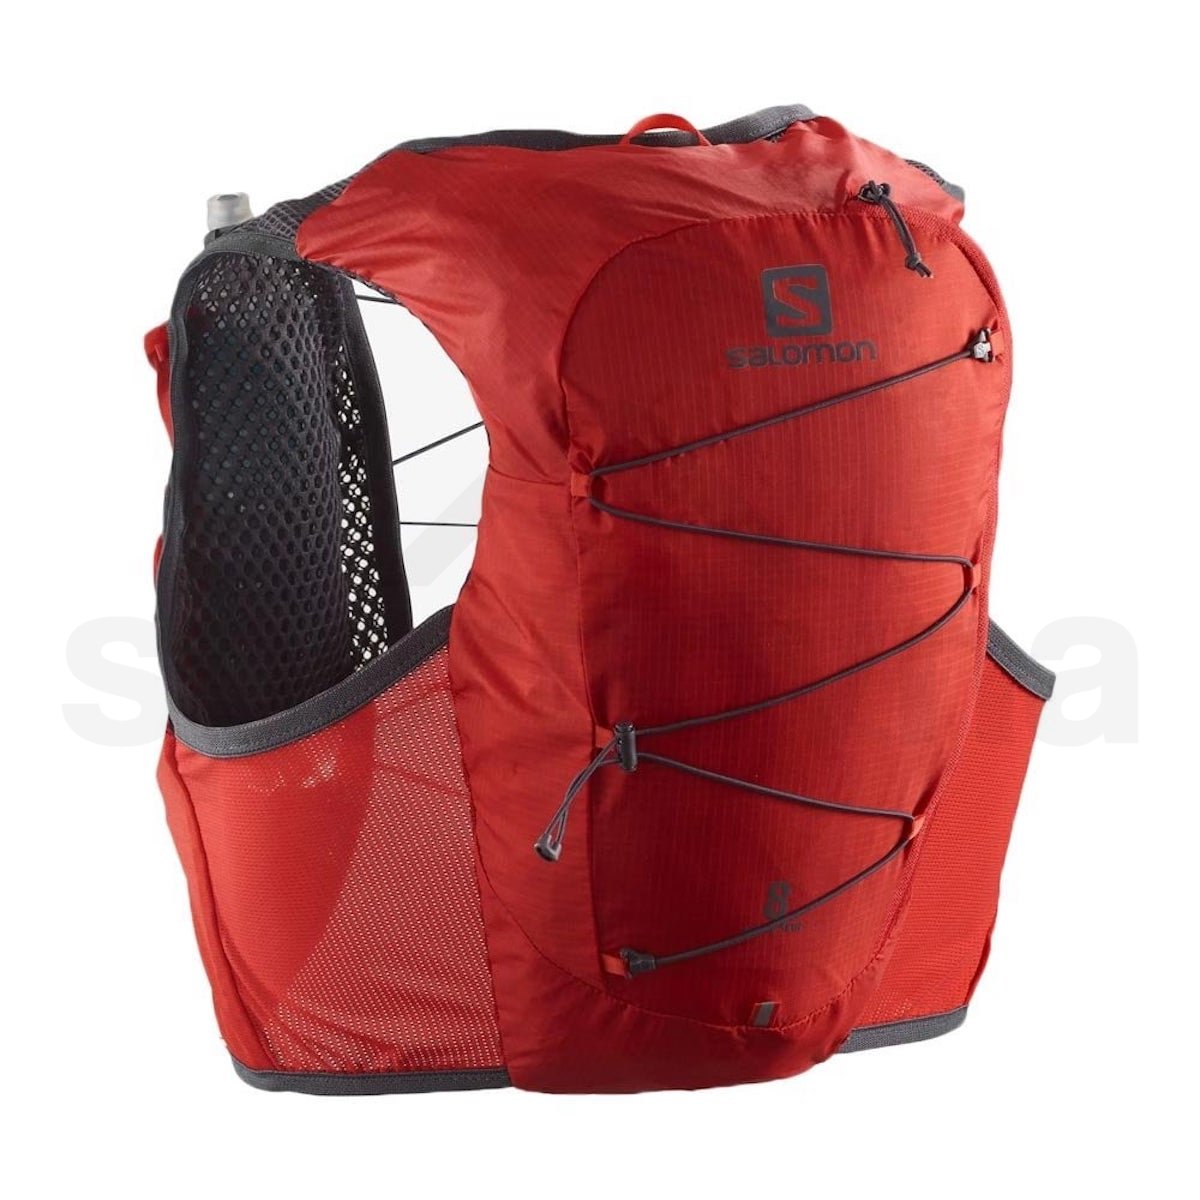 salomon-active-skin-8-with-flasks-fiery-red-ebon-lc1909600-633bef503bad3